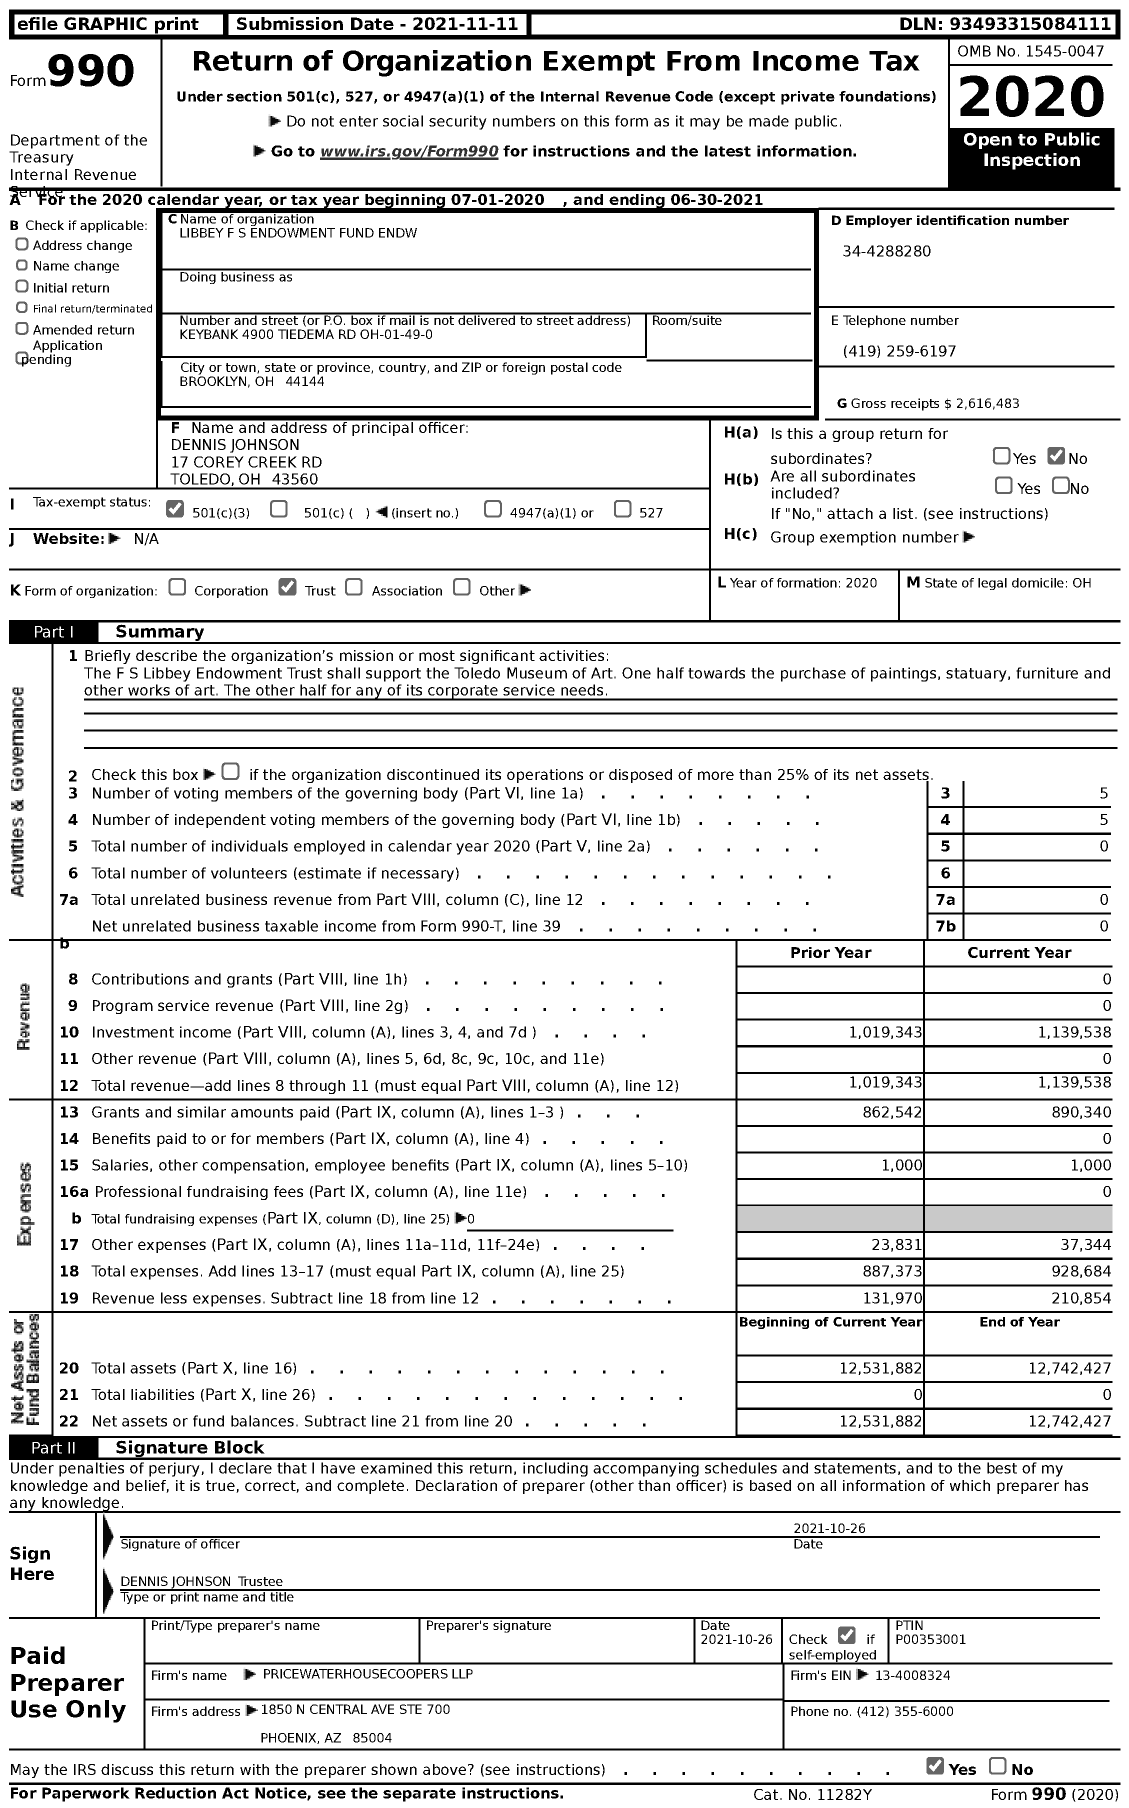 Image of first page of 2020 Form 990 for Libbey F S Endowment Fund Endw